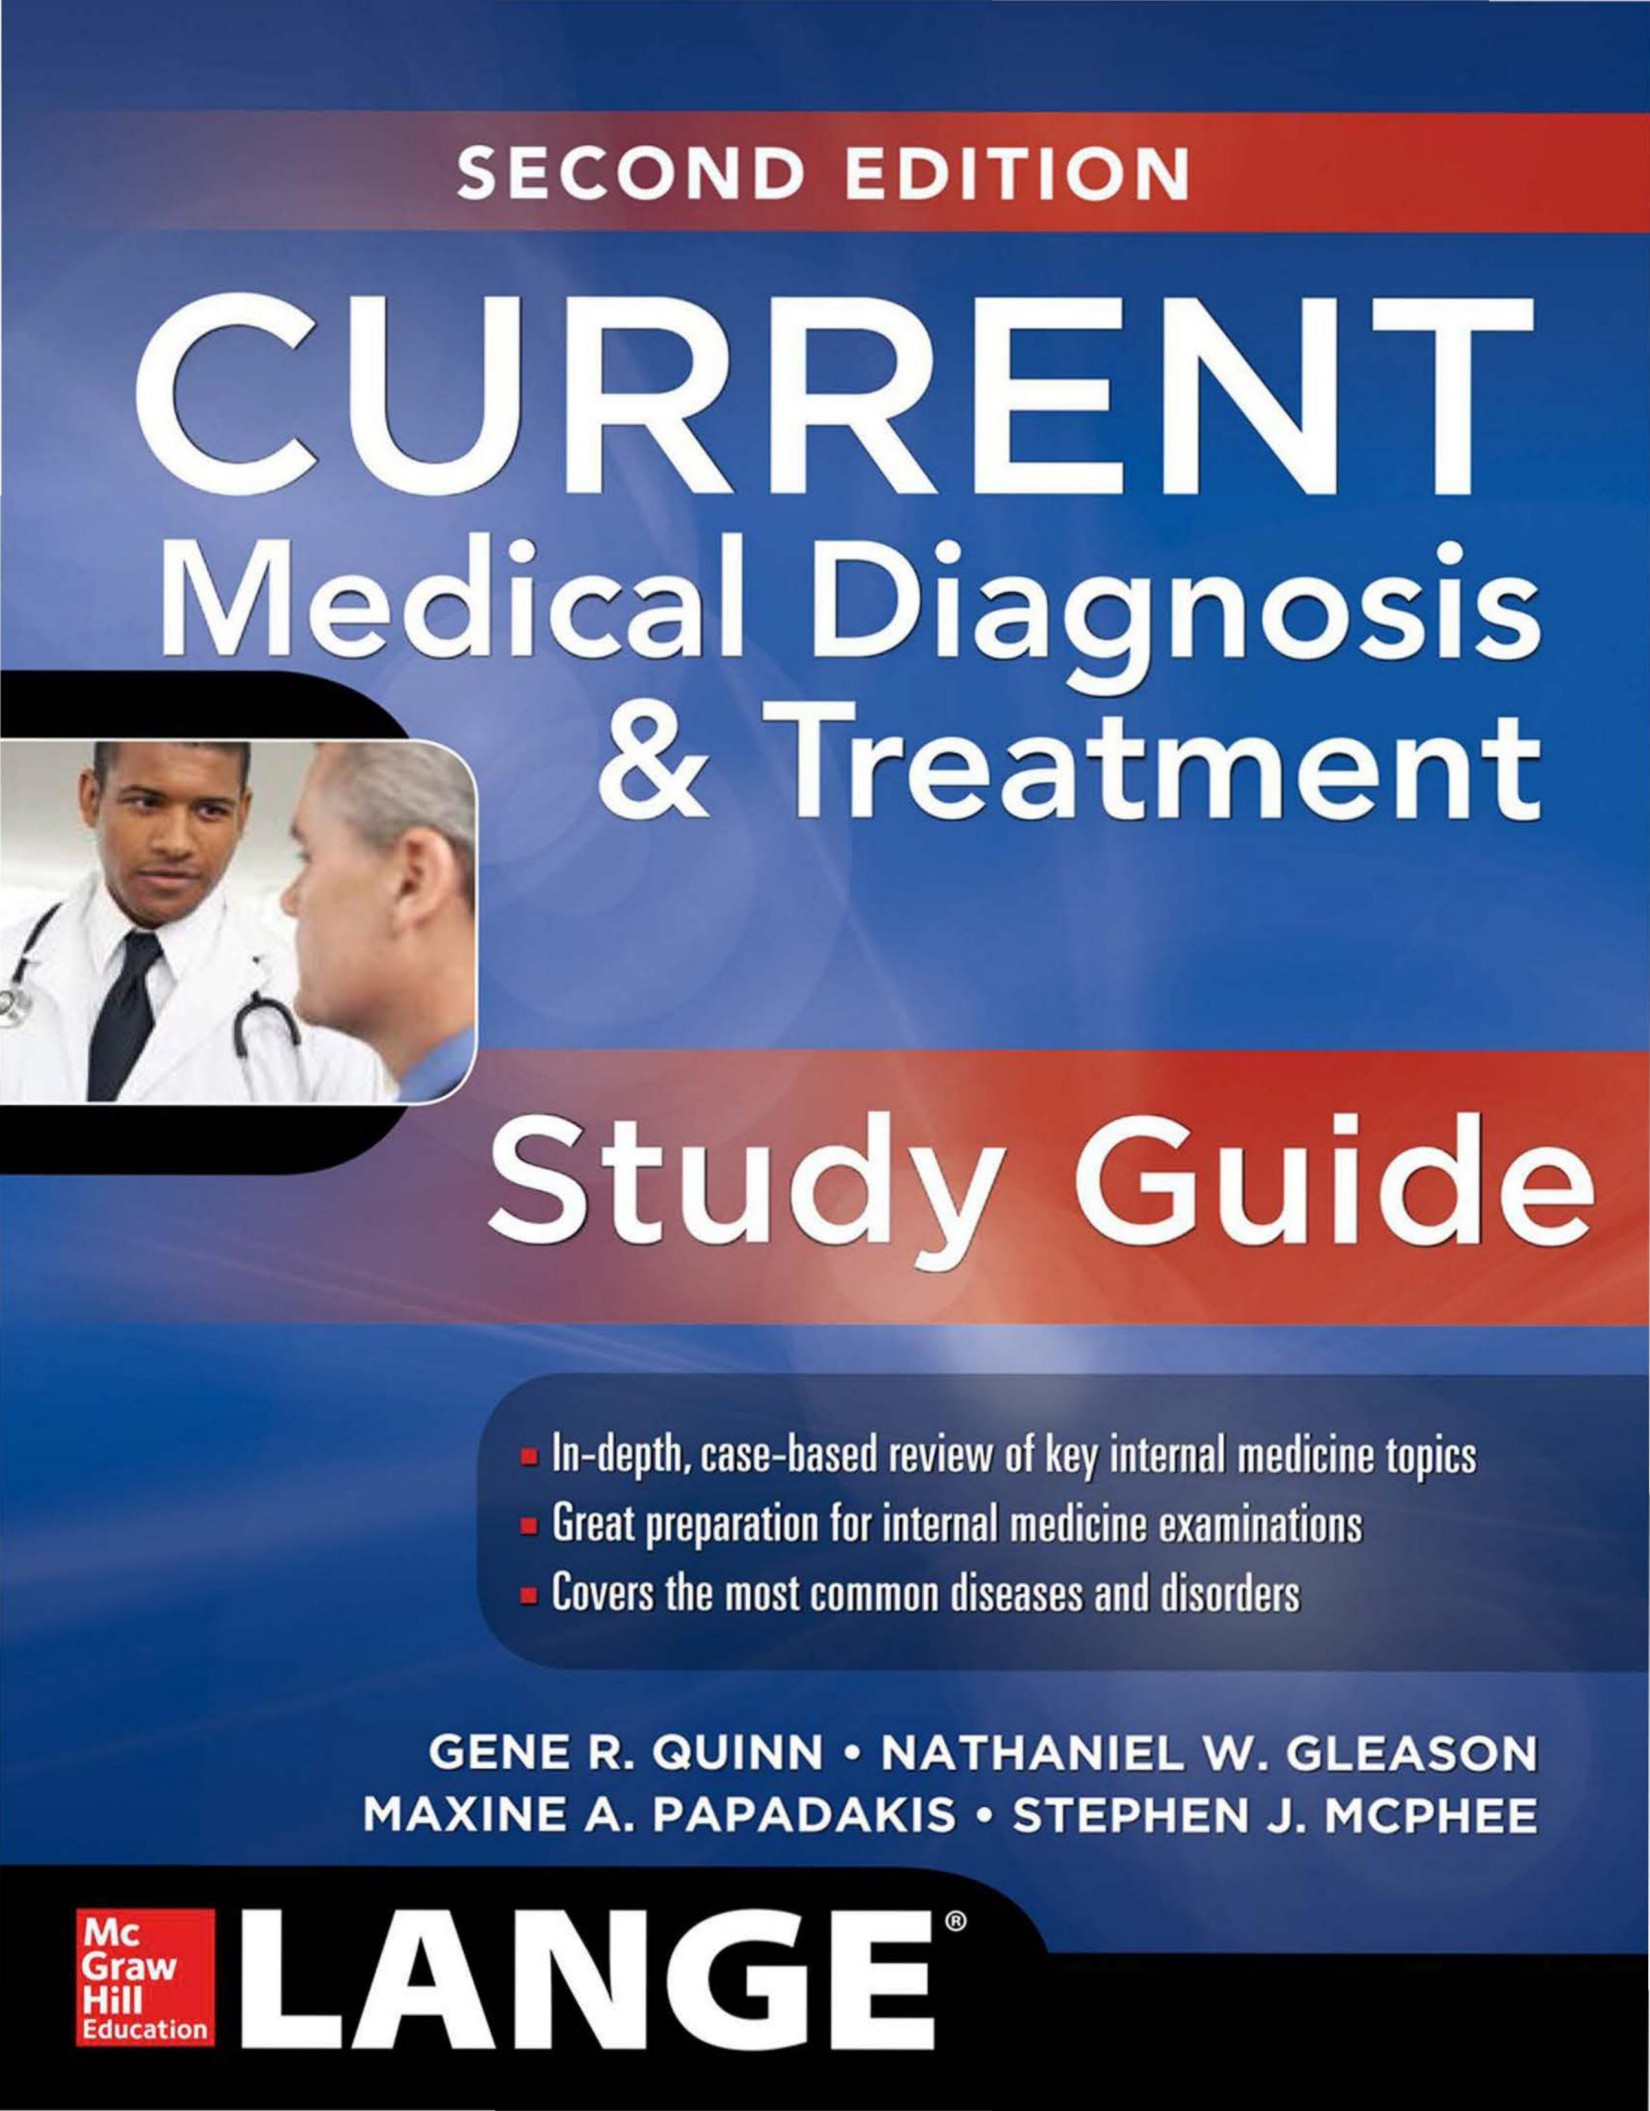 CURRENT Medical Diagnosis and Treatment Study Guide, 2nd Edition.jpg